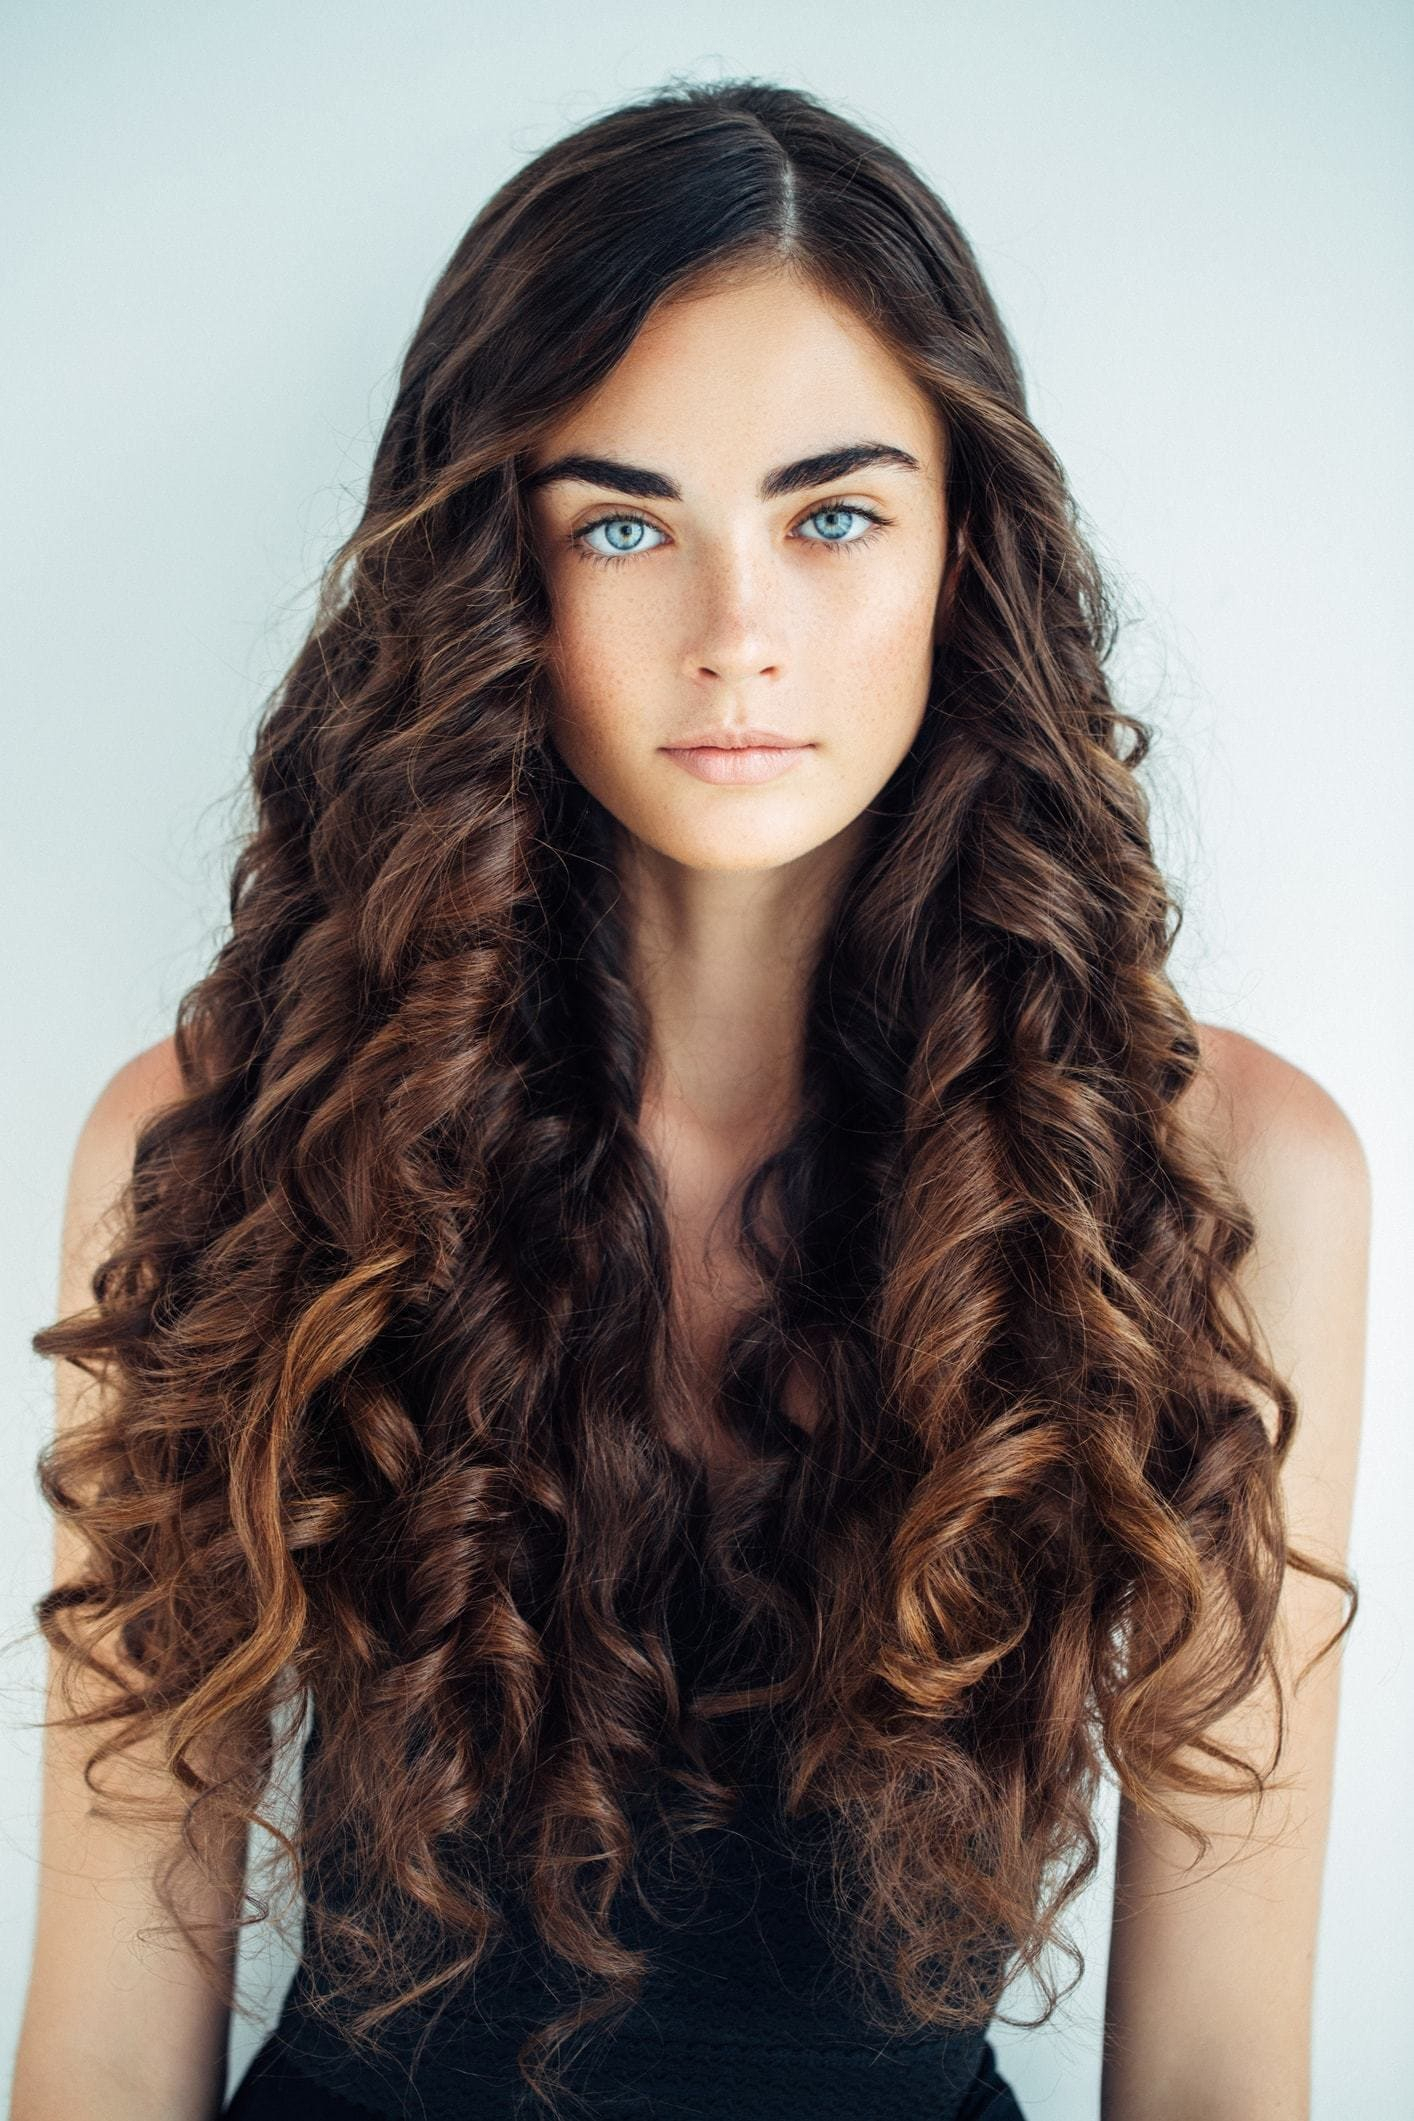 10 Stylish Haircut Ideas For Long Curly Hair curly hairstyles for long hair 19 kinds of curls to consider 2022